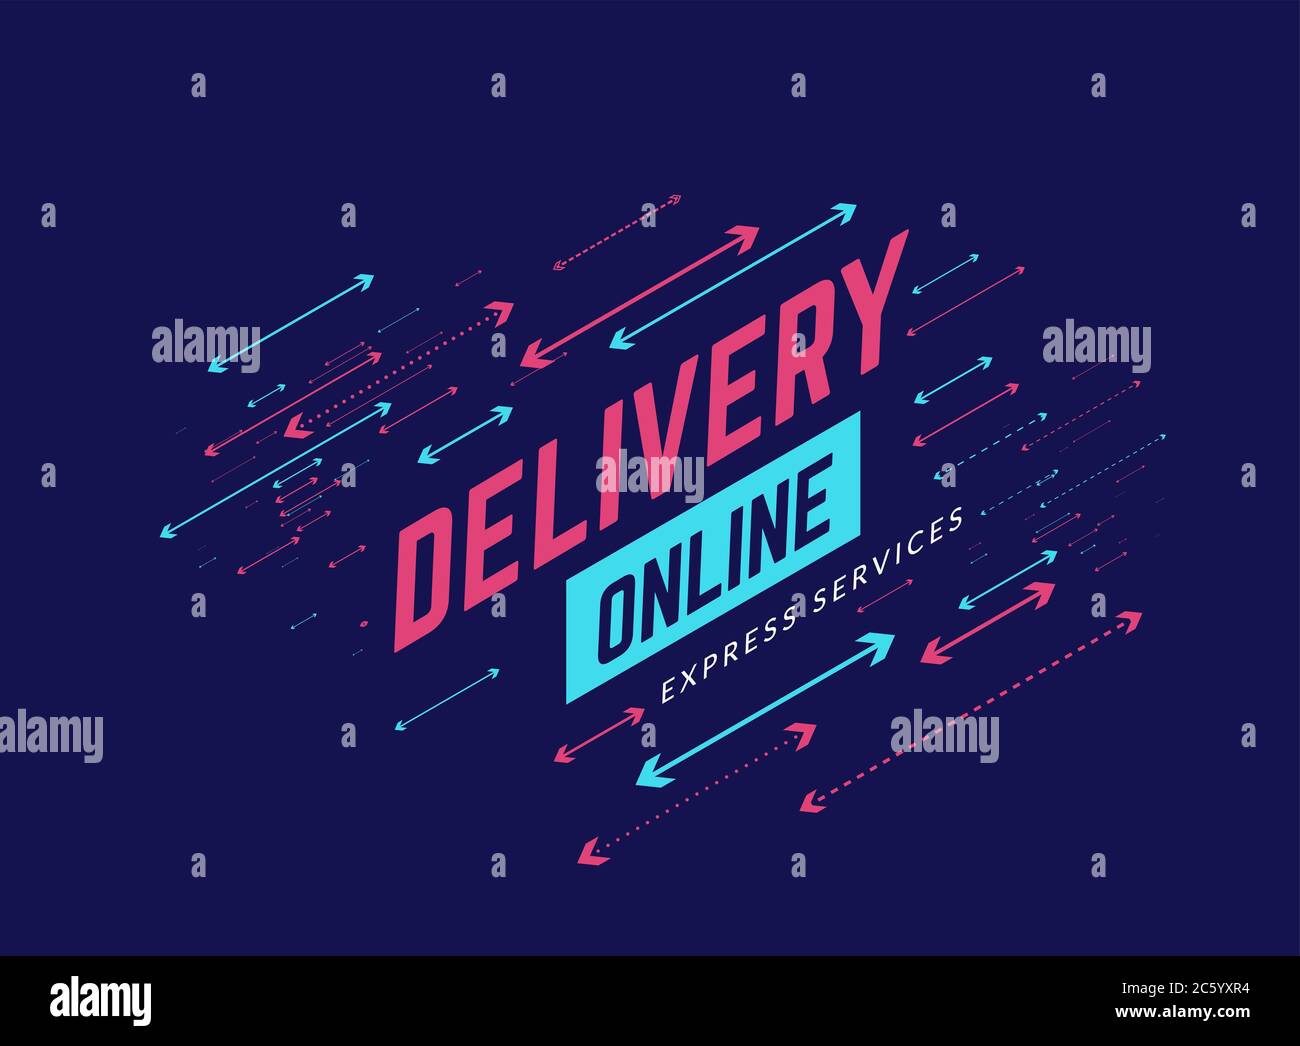 Delivery online design background with arrows. Vector illustration on blue. Stock Photo